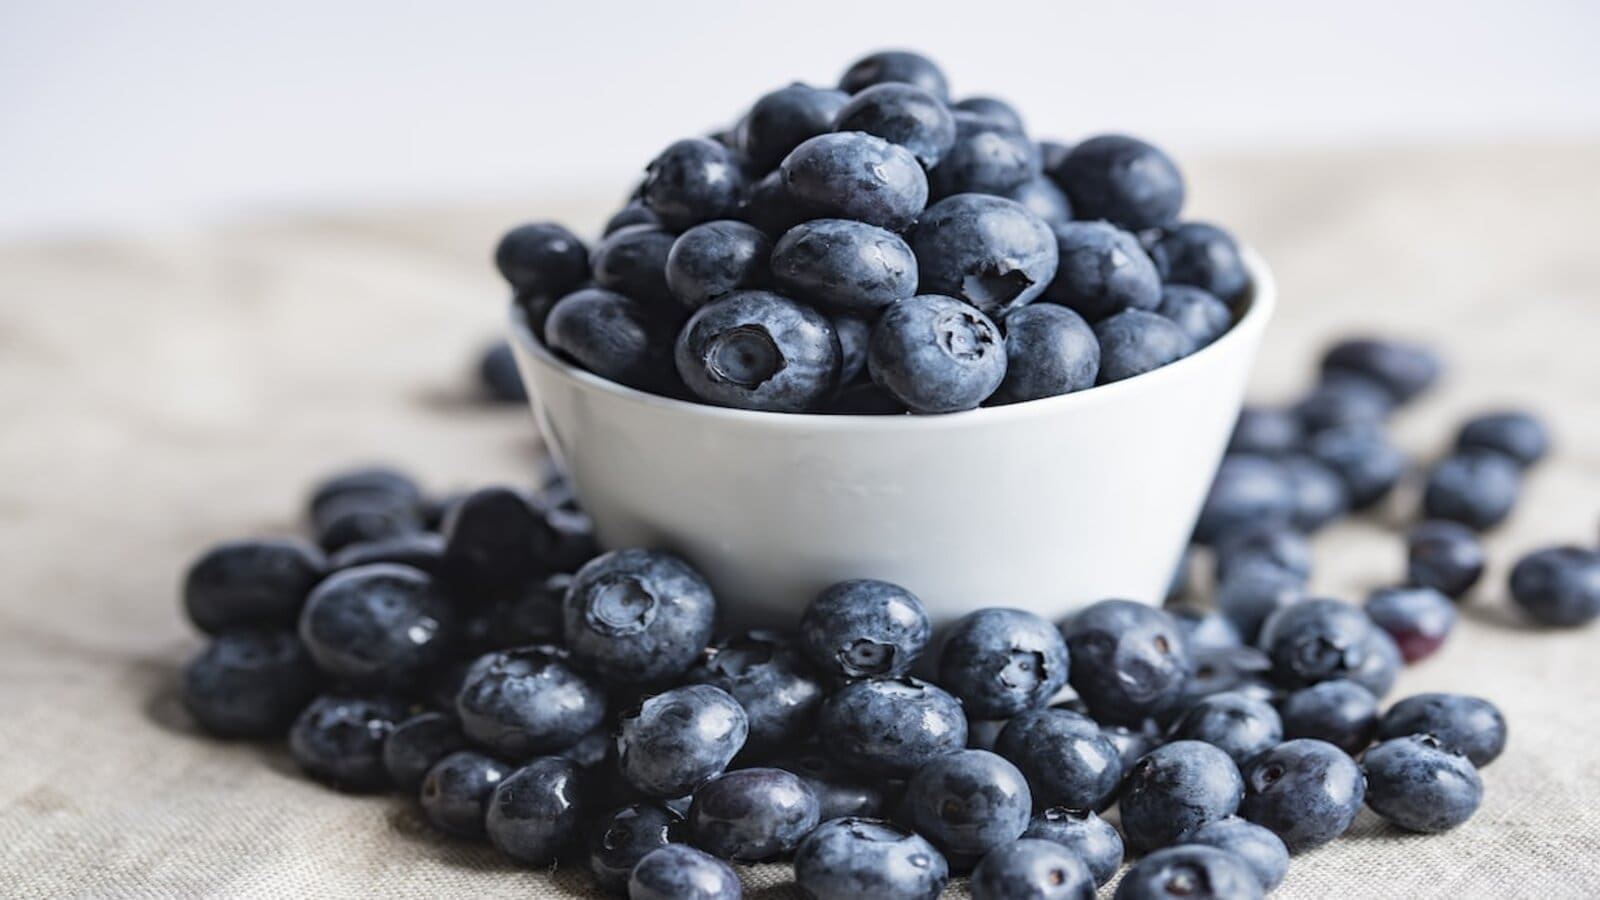 Namibia Berries to invest US$80M over 7 years to boost blueberries production